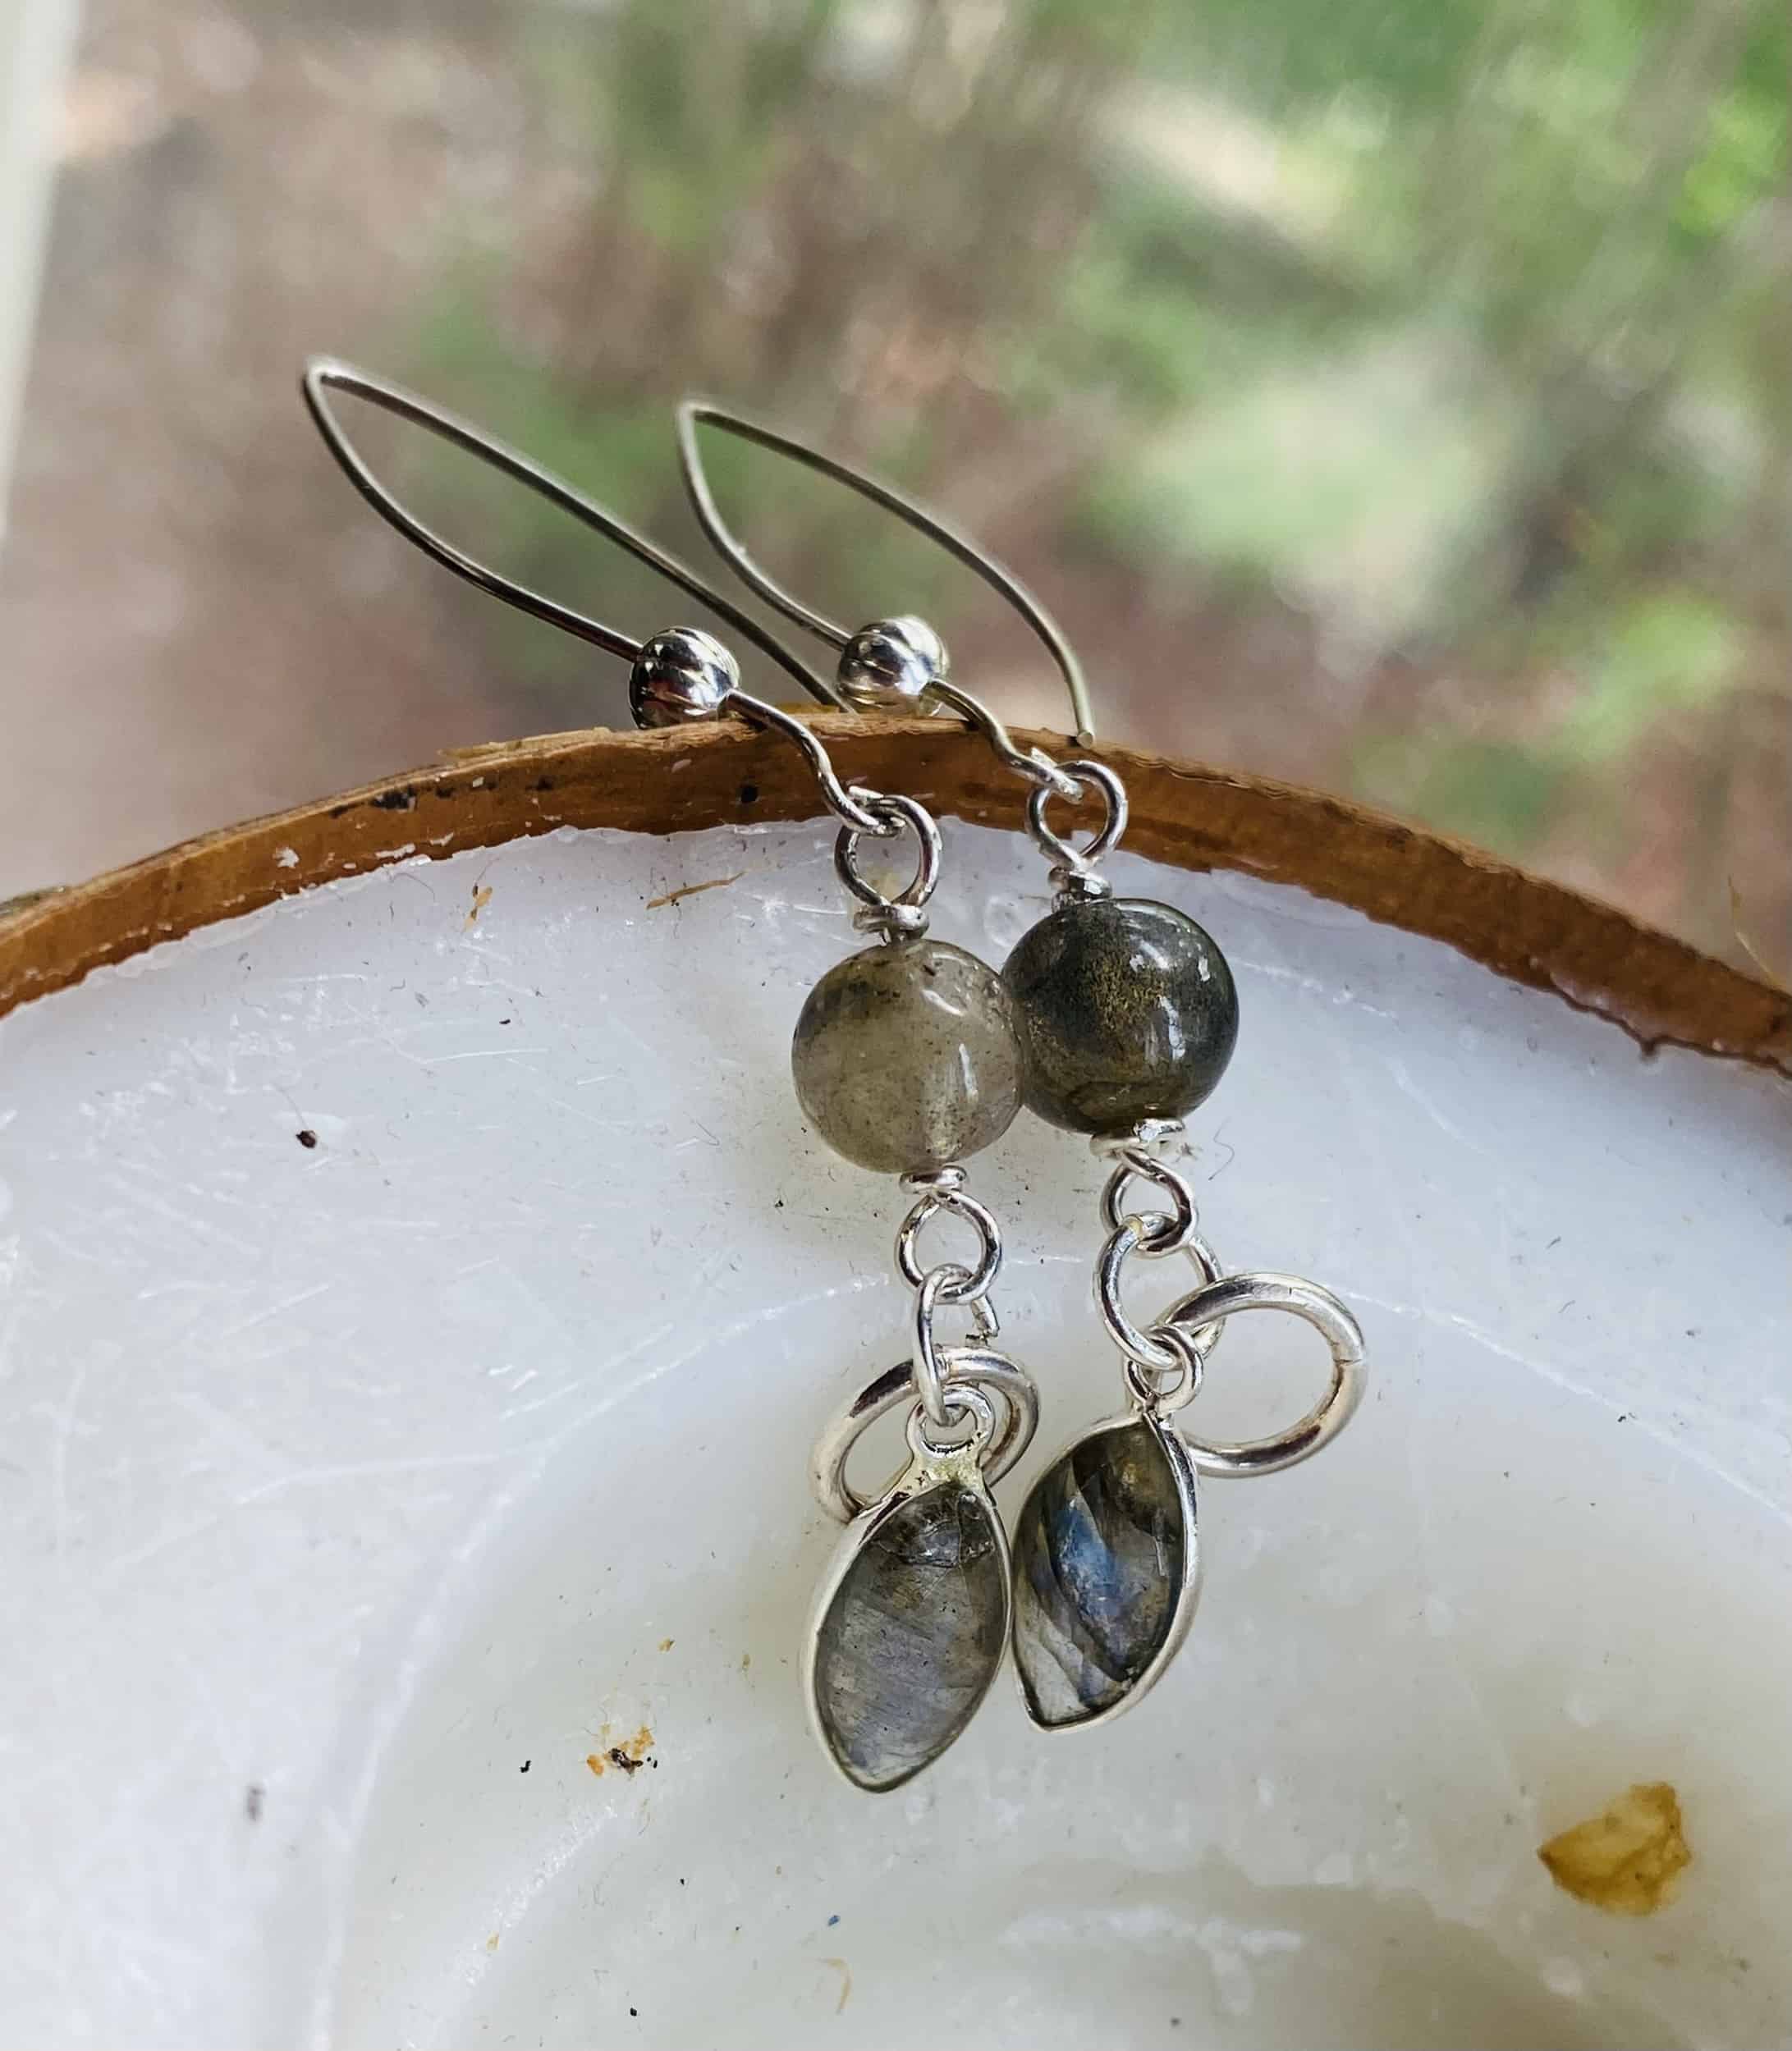 This Labradorite gemstone earrings by Earth Karma is made with love by EARTH KARMA! Shop more unique gift ideas today with Spots Initiatives, the best way to support creators.